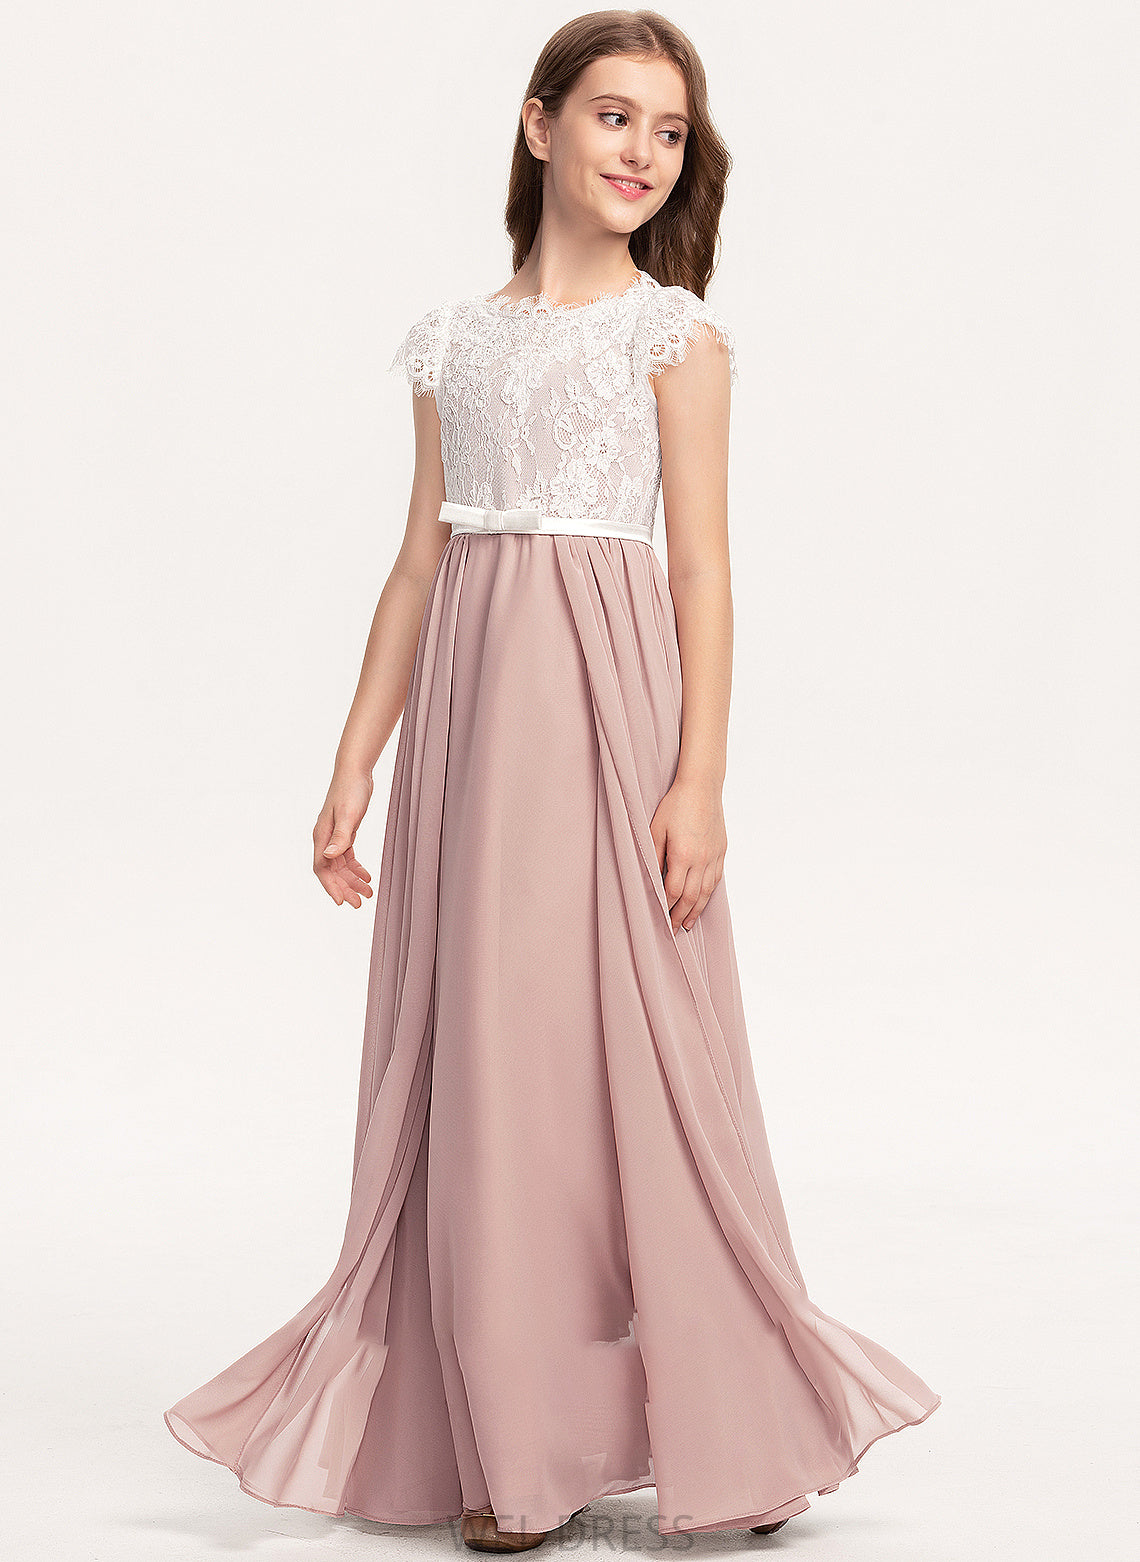 Floor-Length Chiffon Junior Bridesmaid Dresses Lace Violet Bow(s) A-Line Neck With Scoop